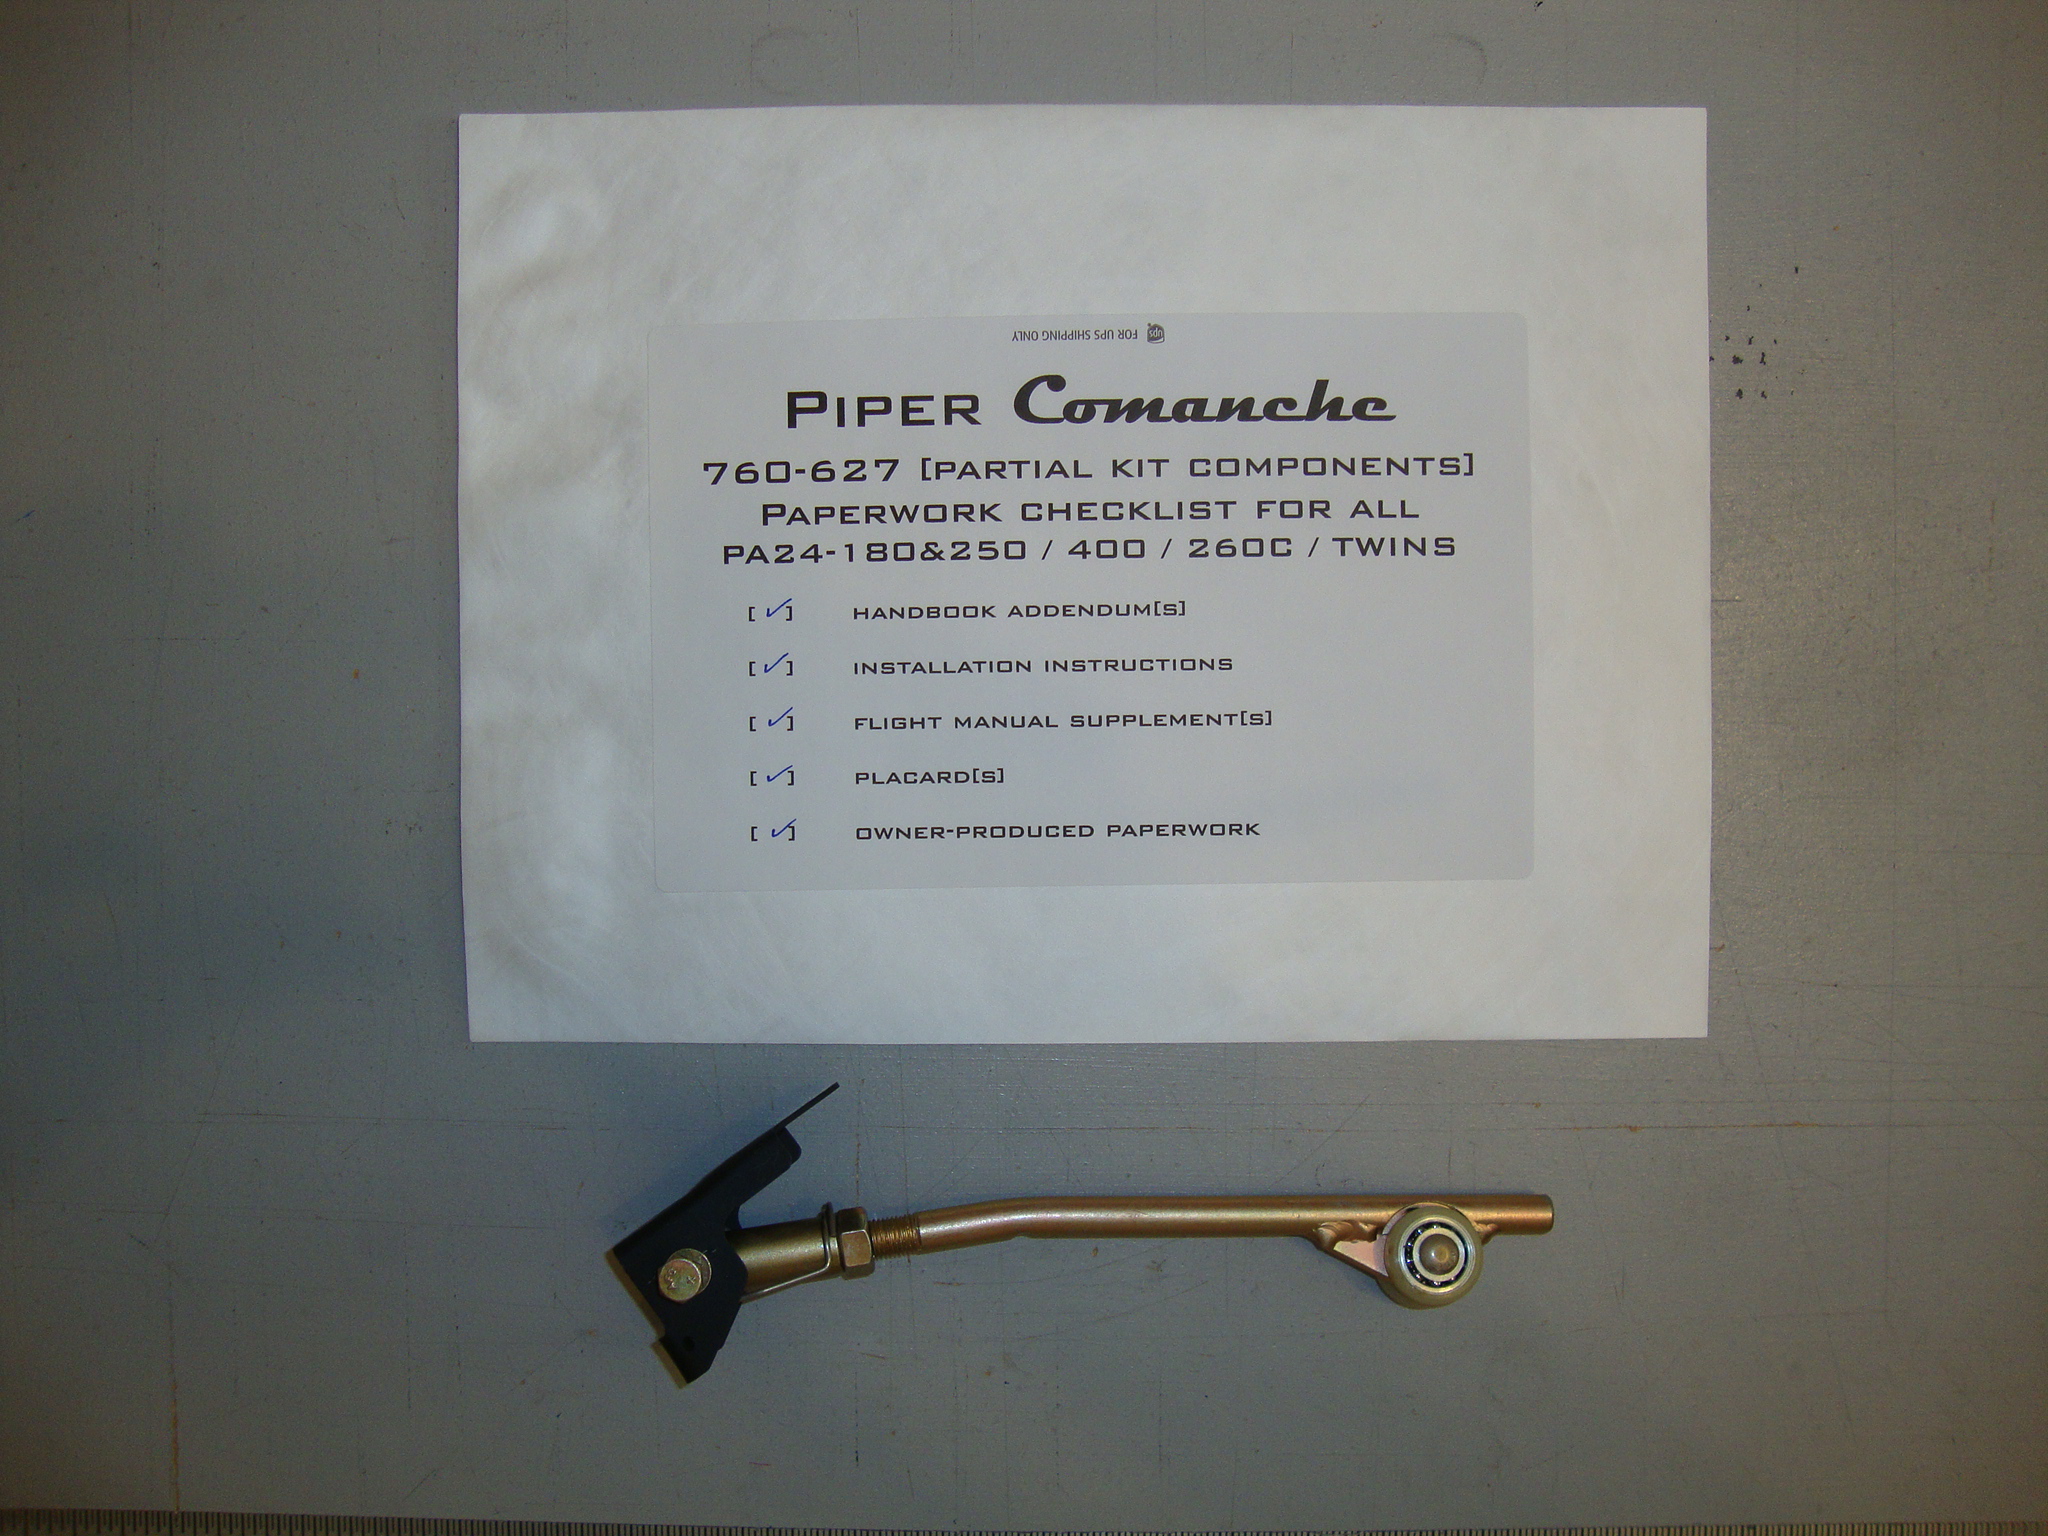 Security lock components Piper kit PN 760-627 Photo 1